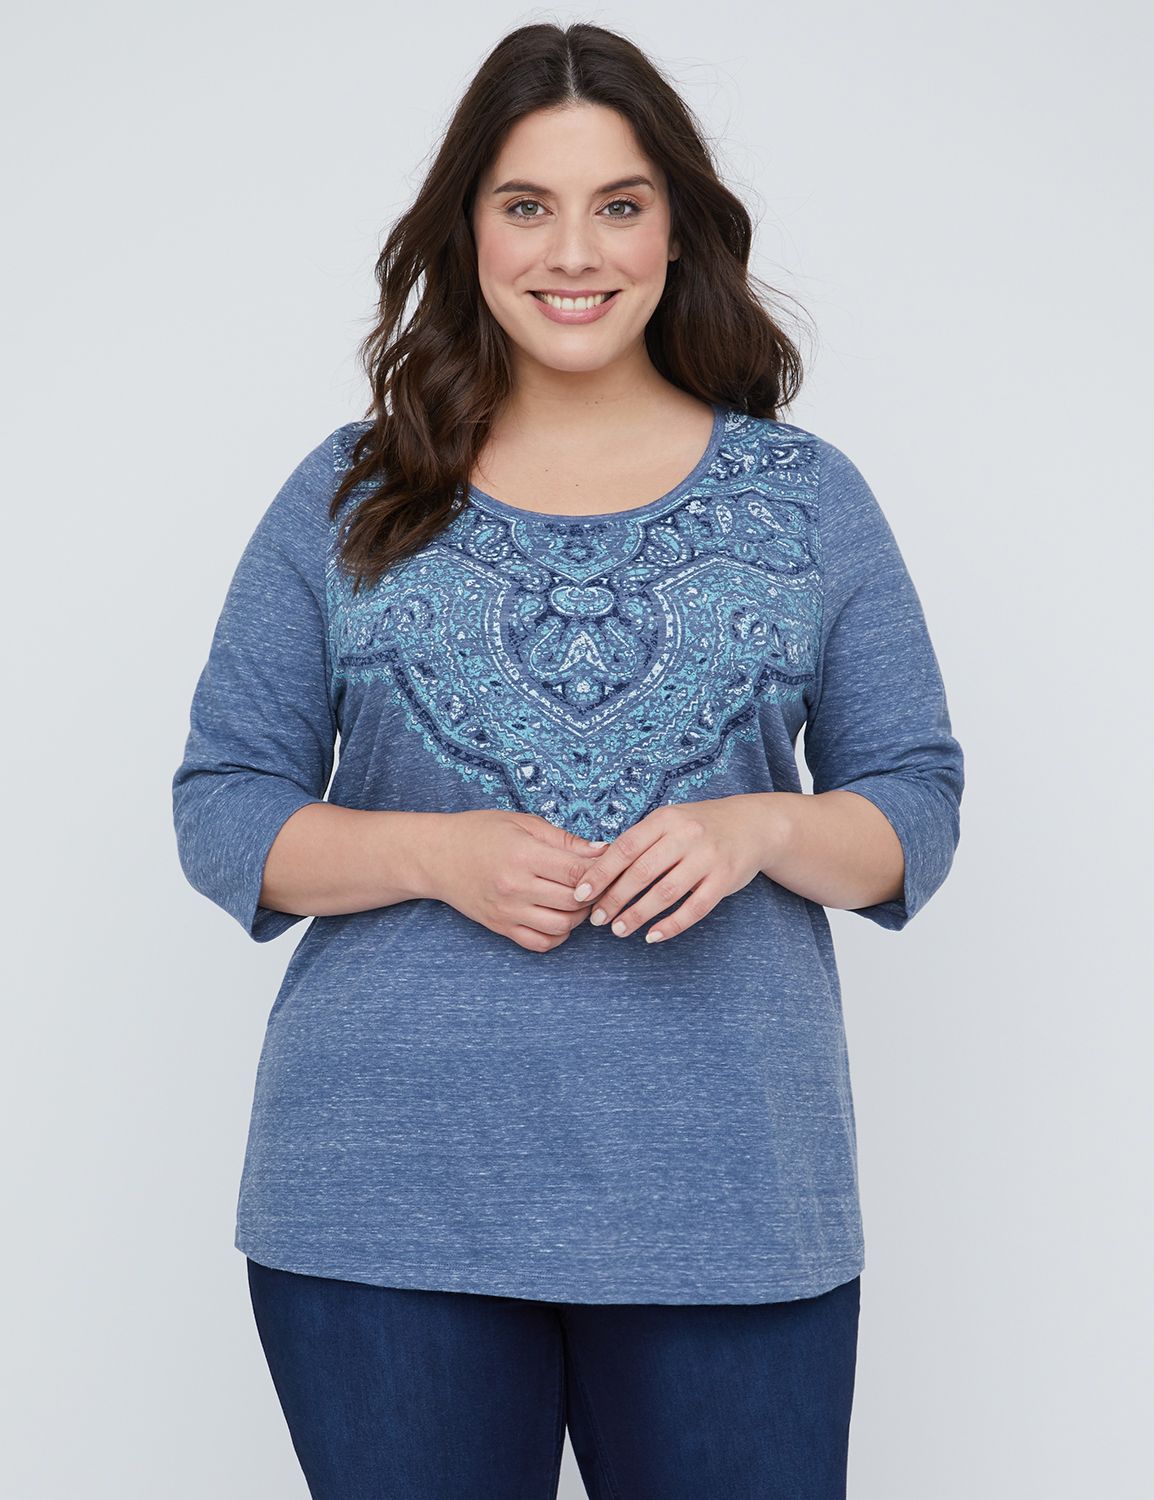 New Arrivals & Styles In Plus Size Fashion | Catherines